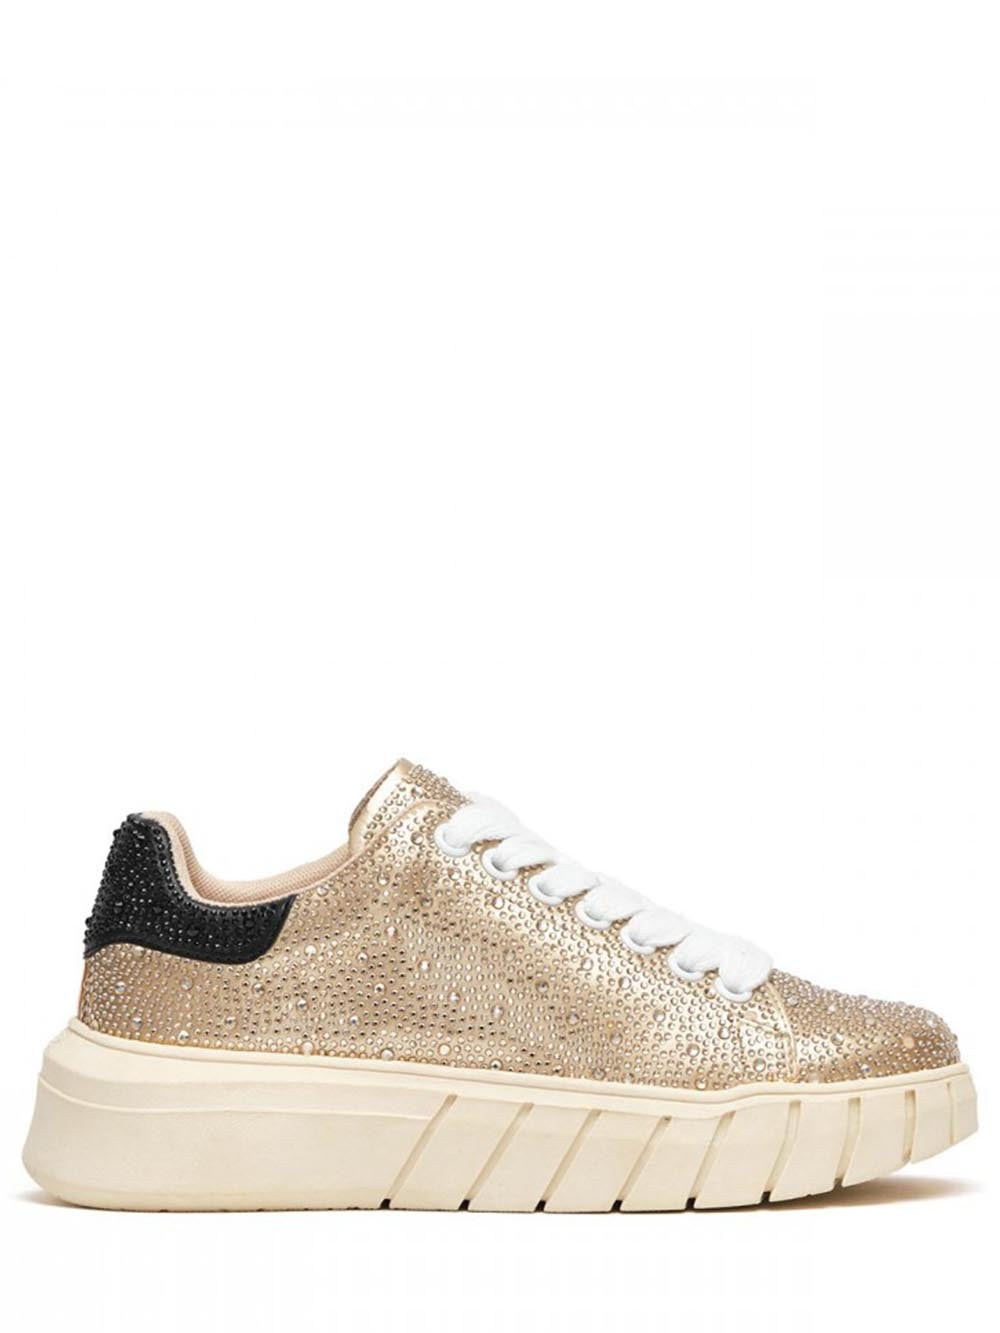 GAELLE Sneakers Donna Oro